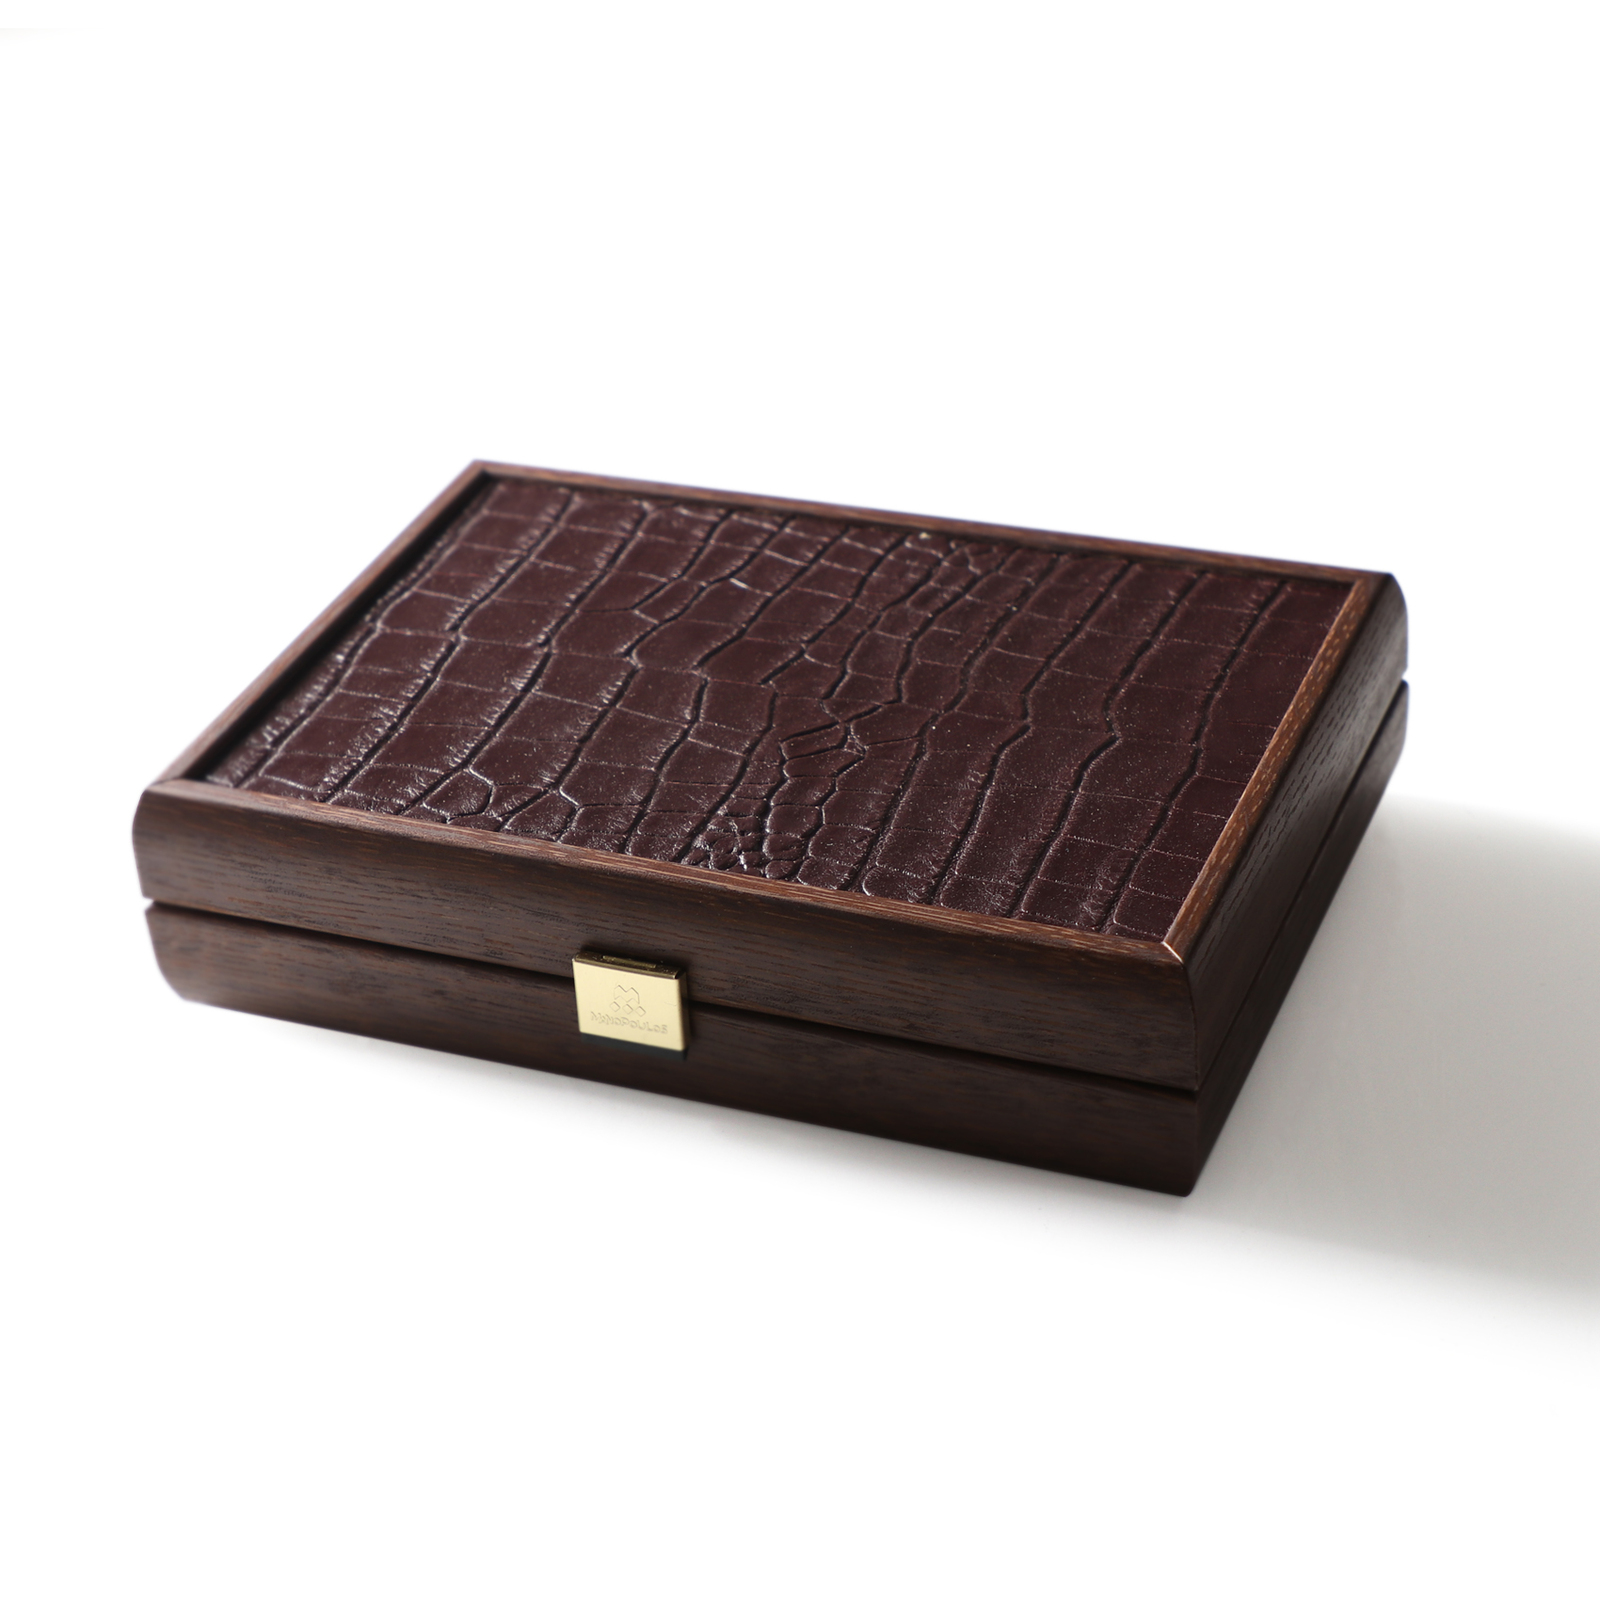 Arcardian Playing Card Case | 2 Deck | Handcrafted wood leatherette